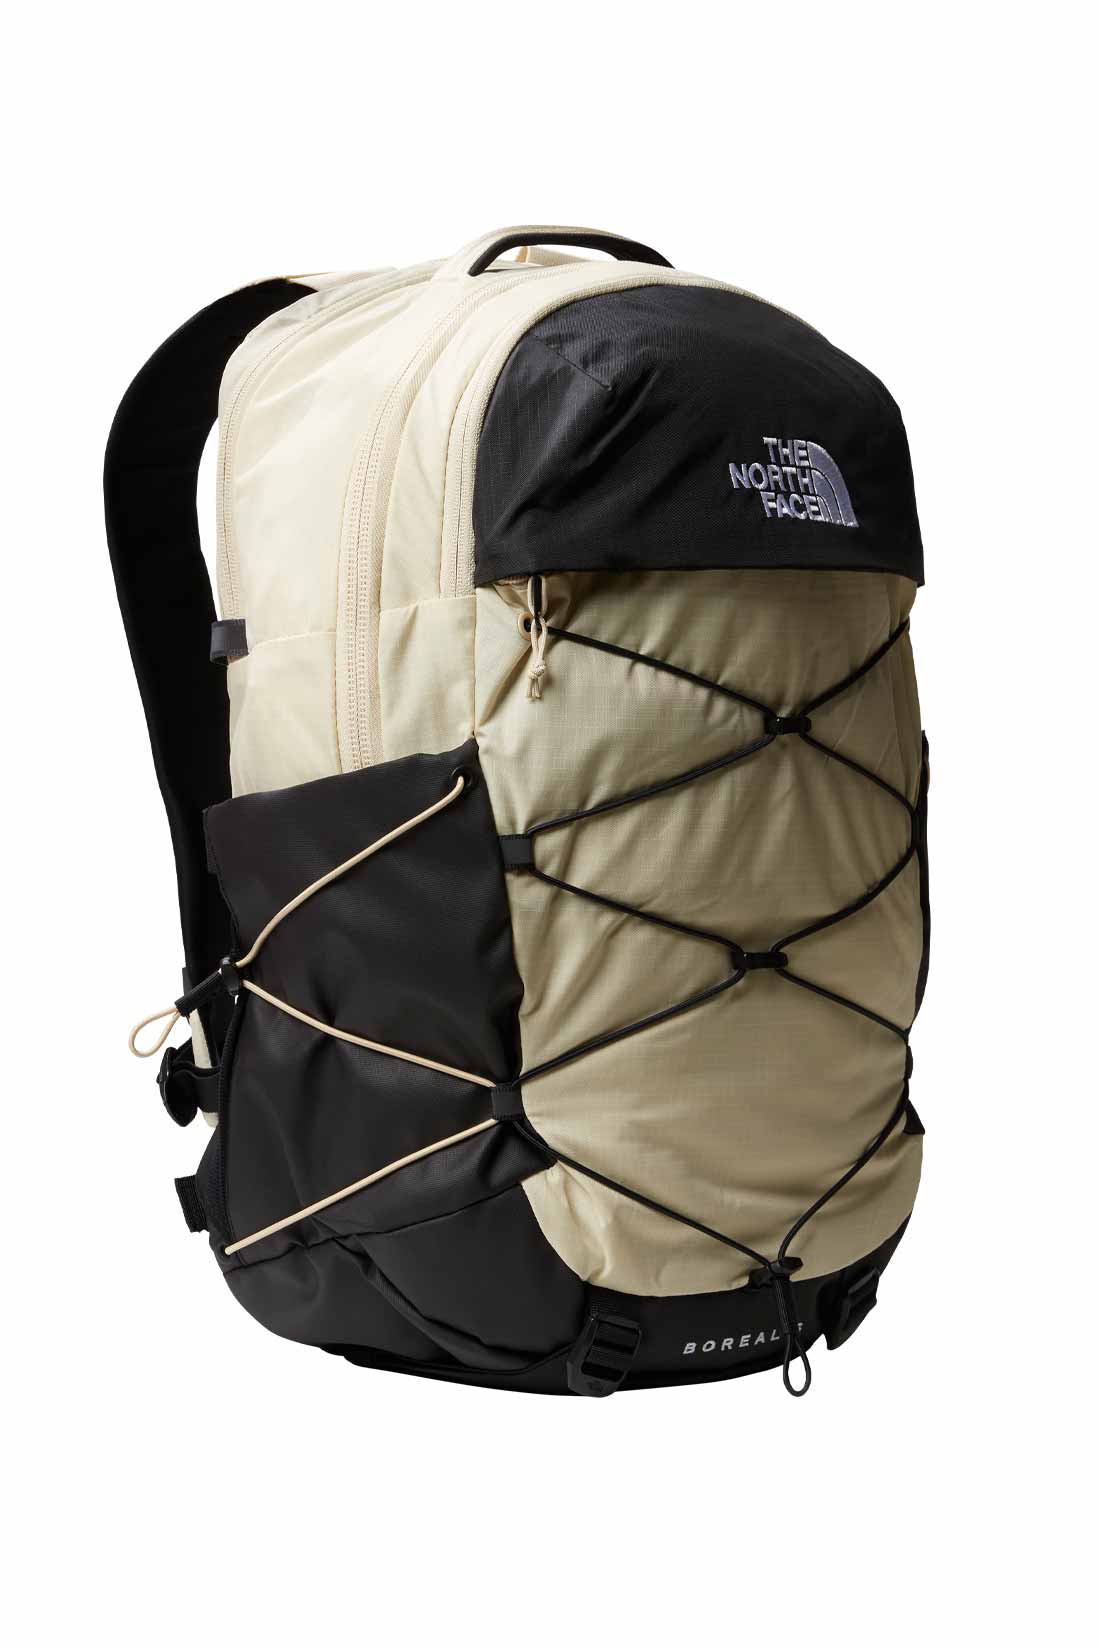 Men’s borealis backpack: On-the-Go Essentials插图4